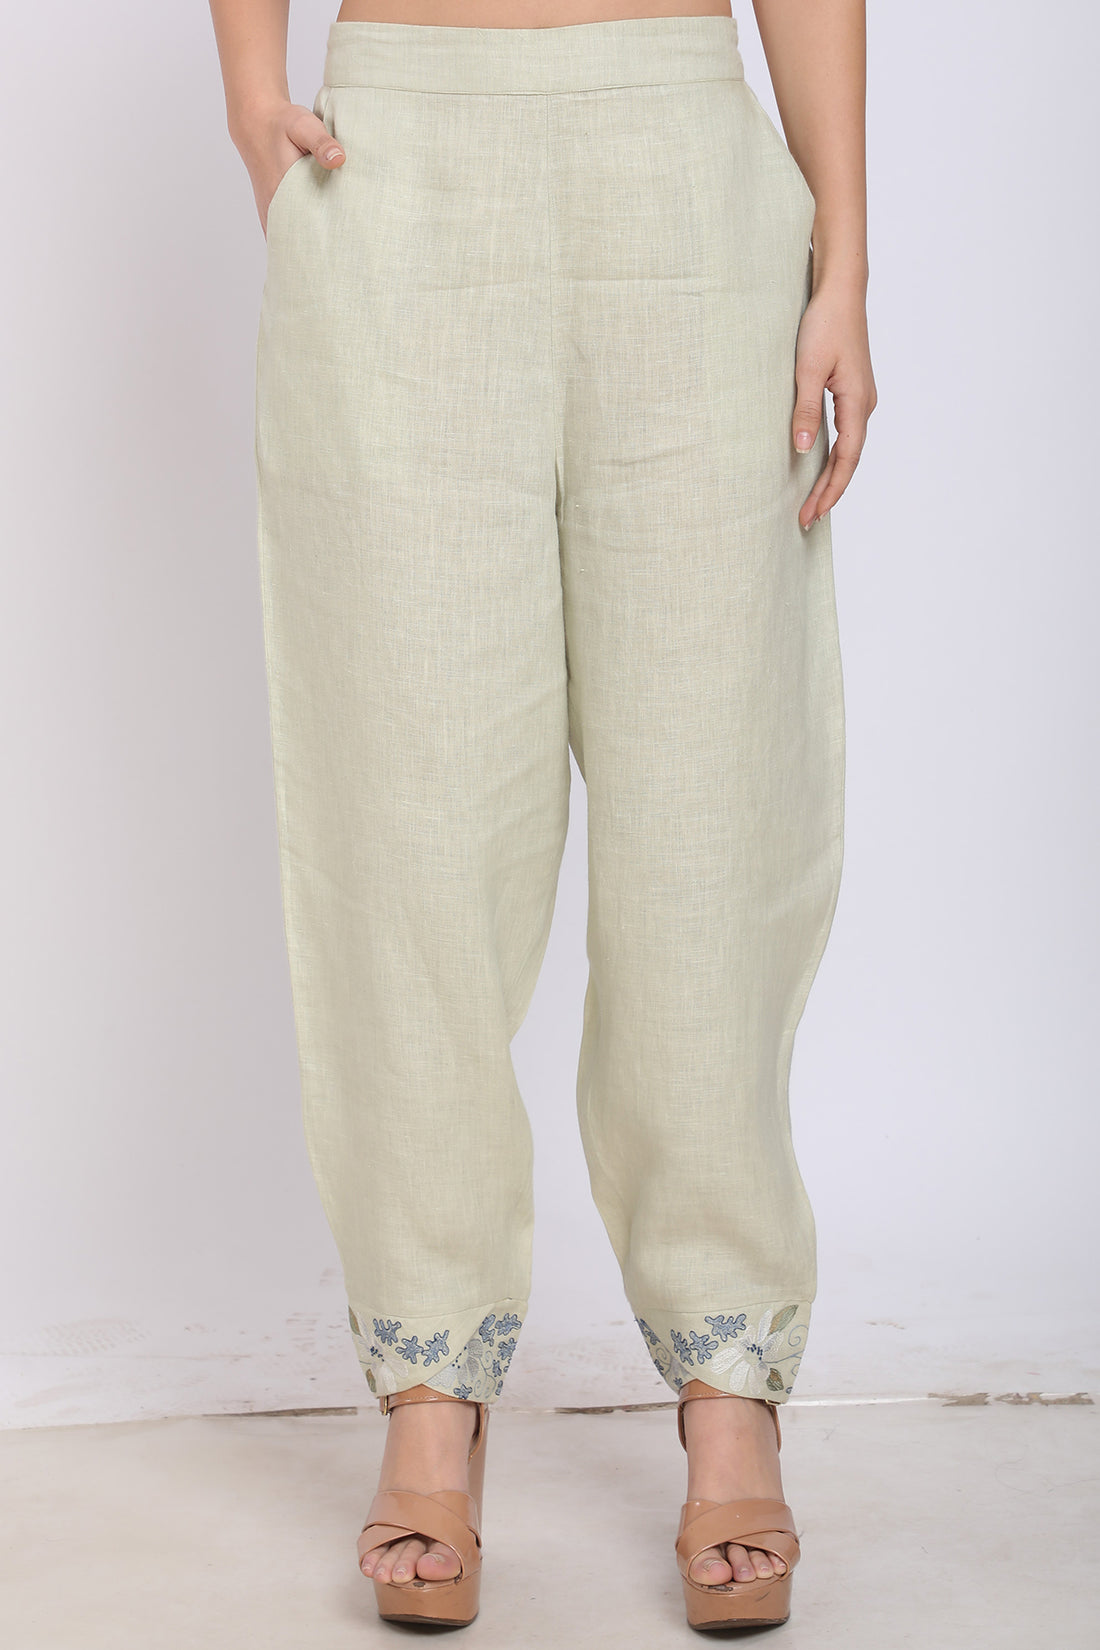 Printed Linen Pants - Ivory, Abstract Bloom